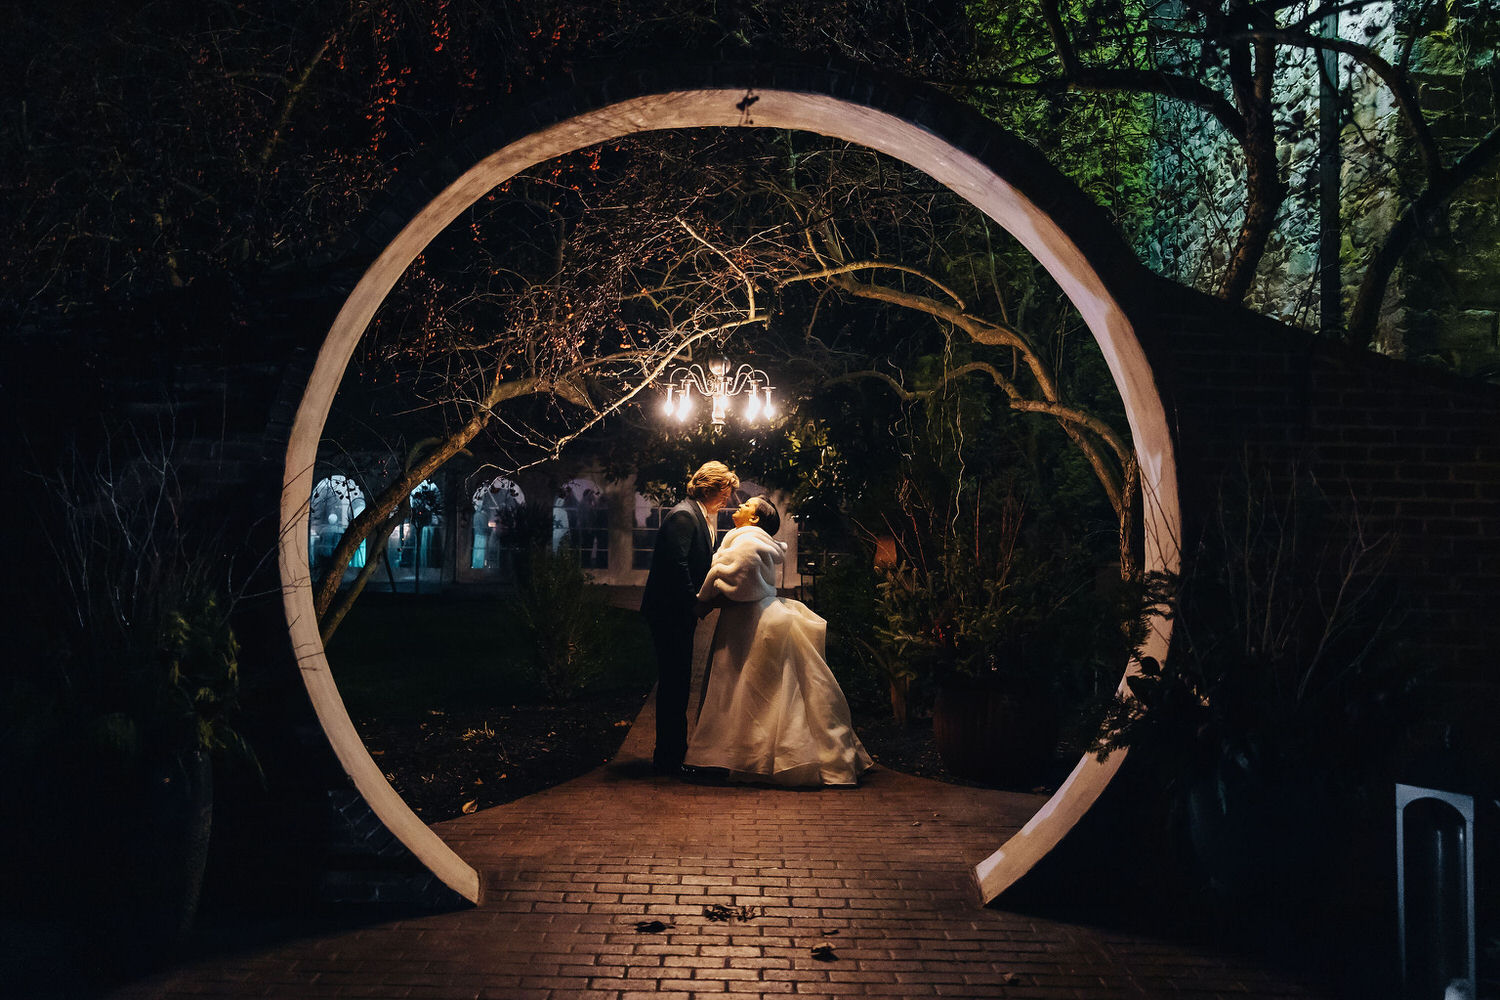 A night-time wedding scene under a large circular archway, showing a bride in a white gown and a groom in a suit embracing each other, with dimly lit trees and a chandelier in the background enhancing the romantic ambiance.